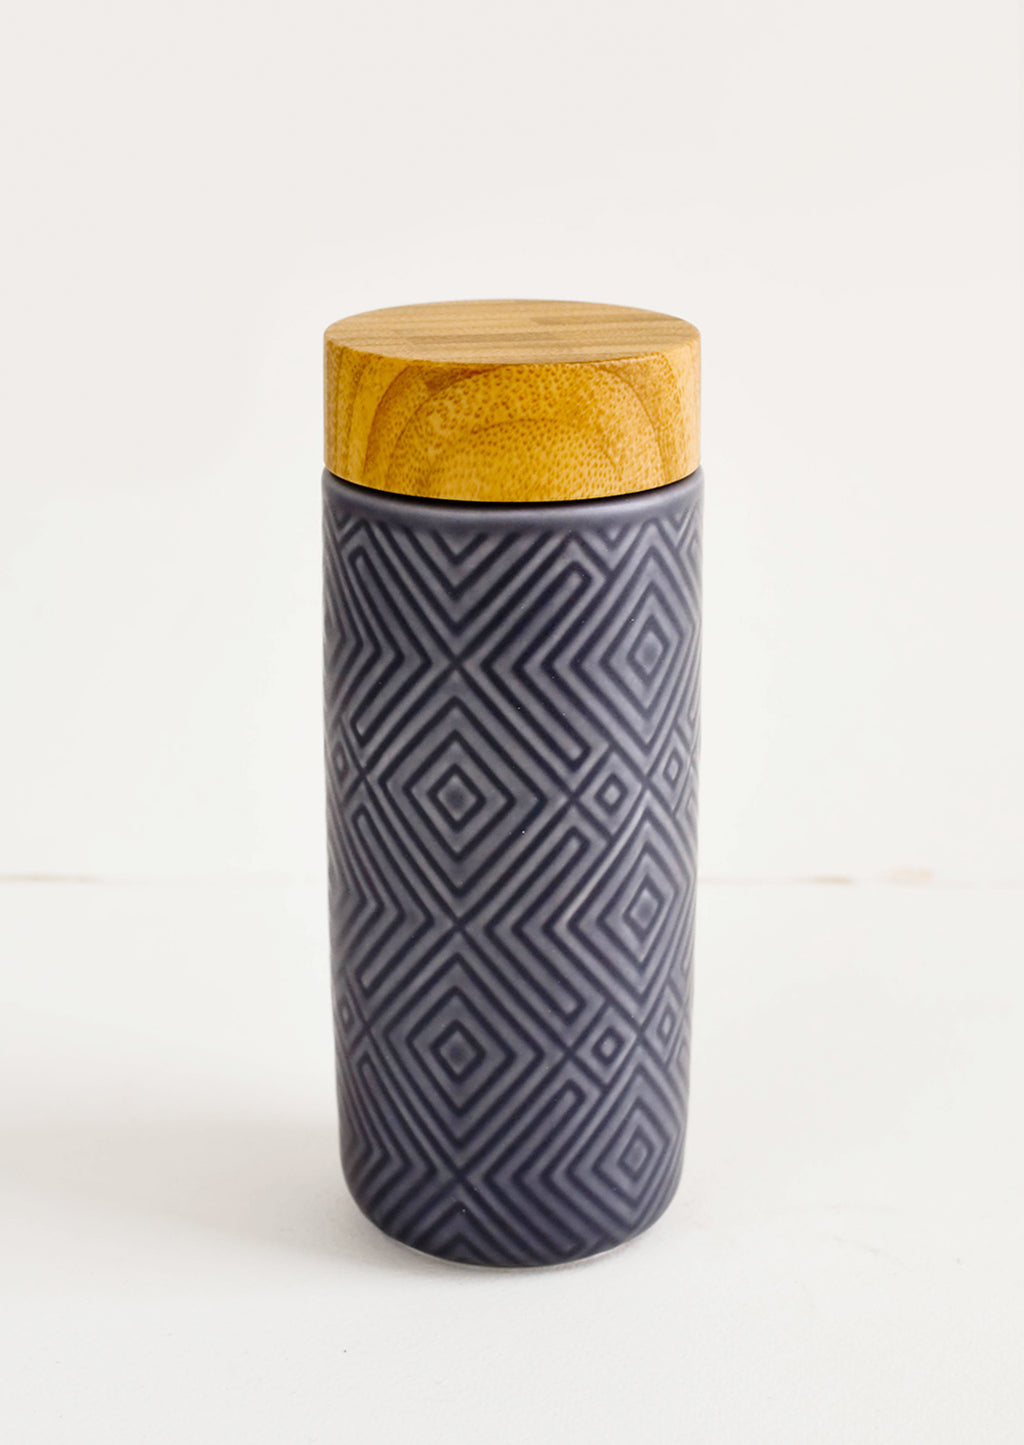 Stone Blue: Geometric textured ceramic tall travel tumbler in stone blue with bamboo lid